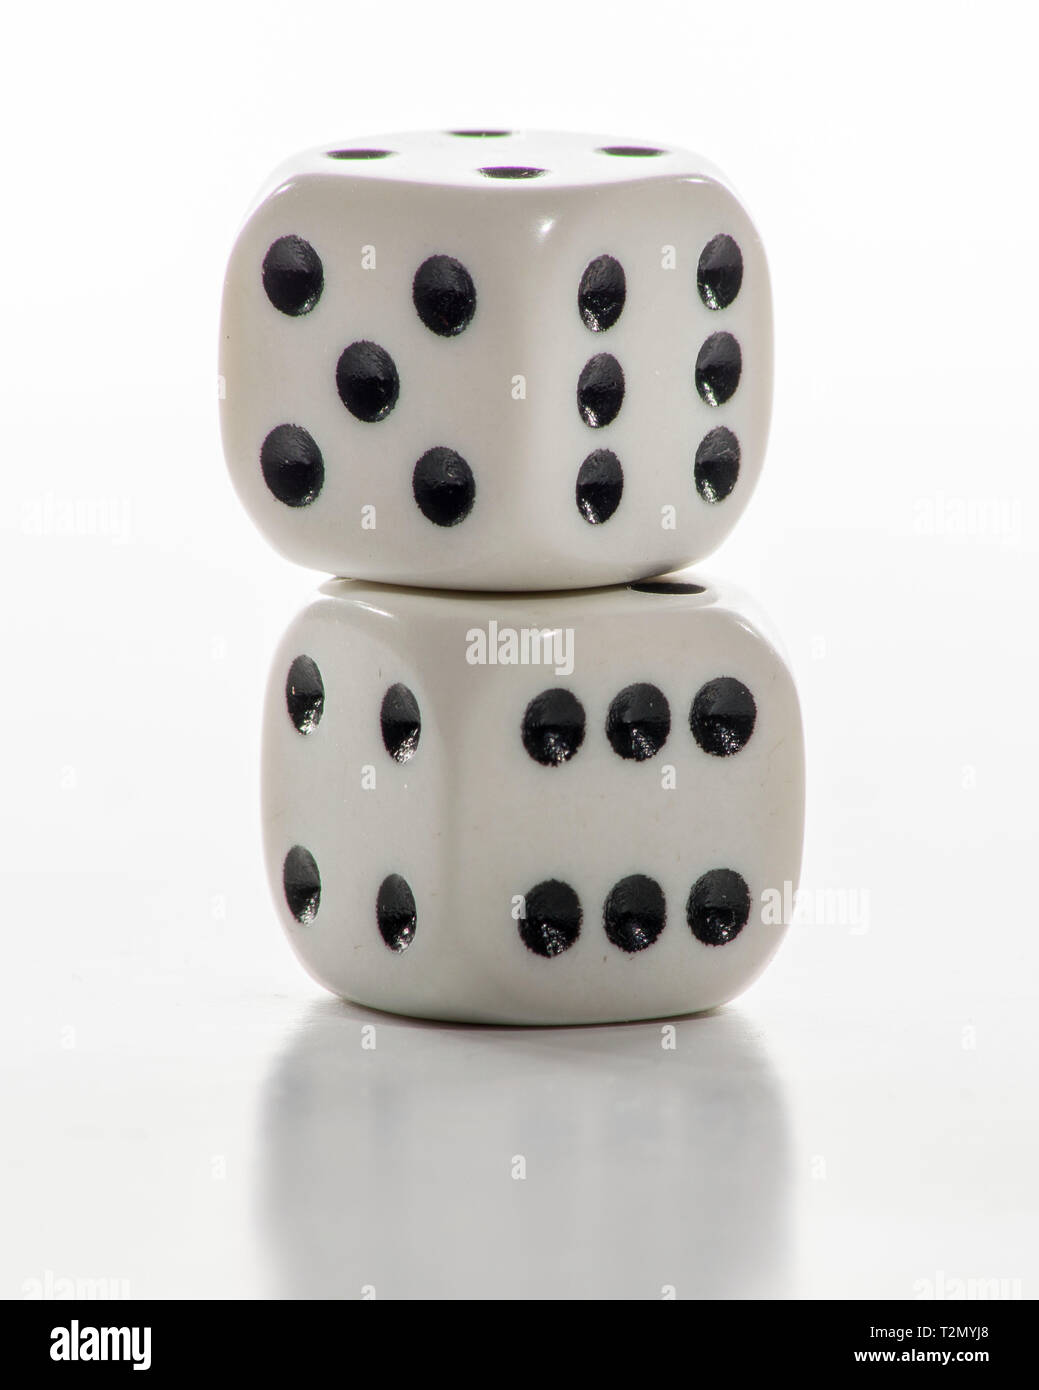 Monopoly board game pieces. Stock Photo